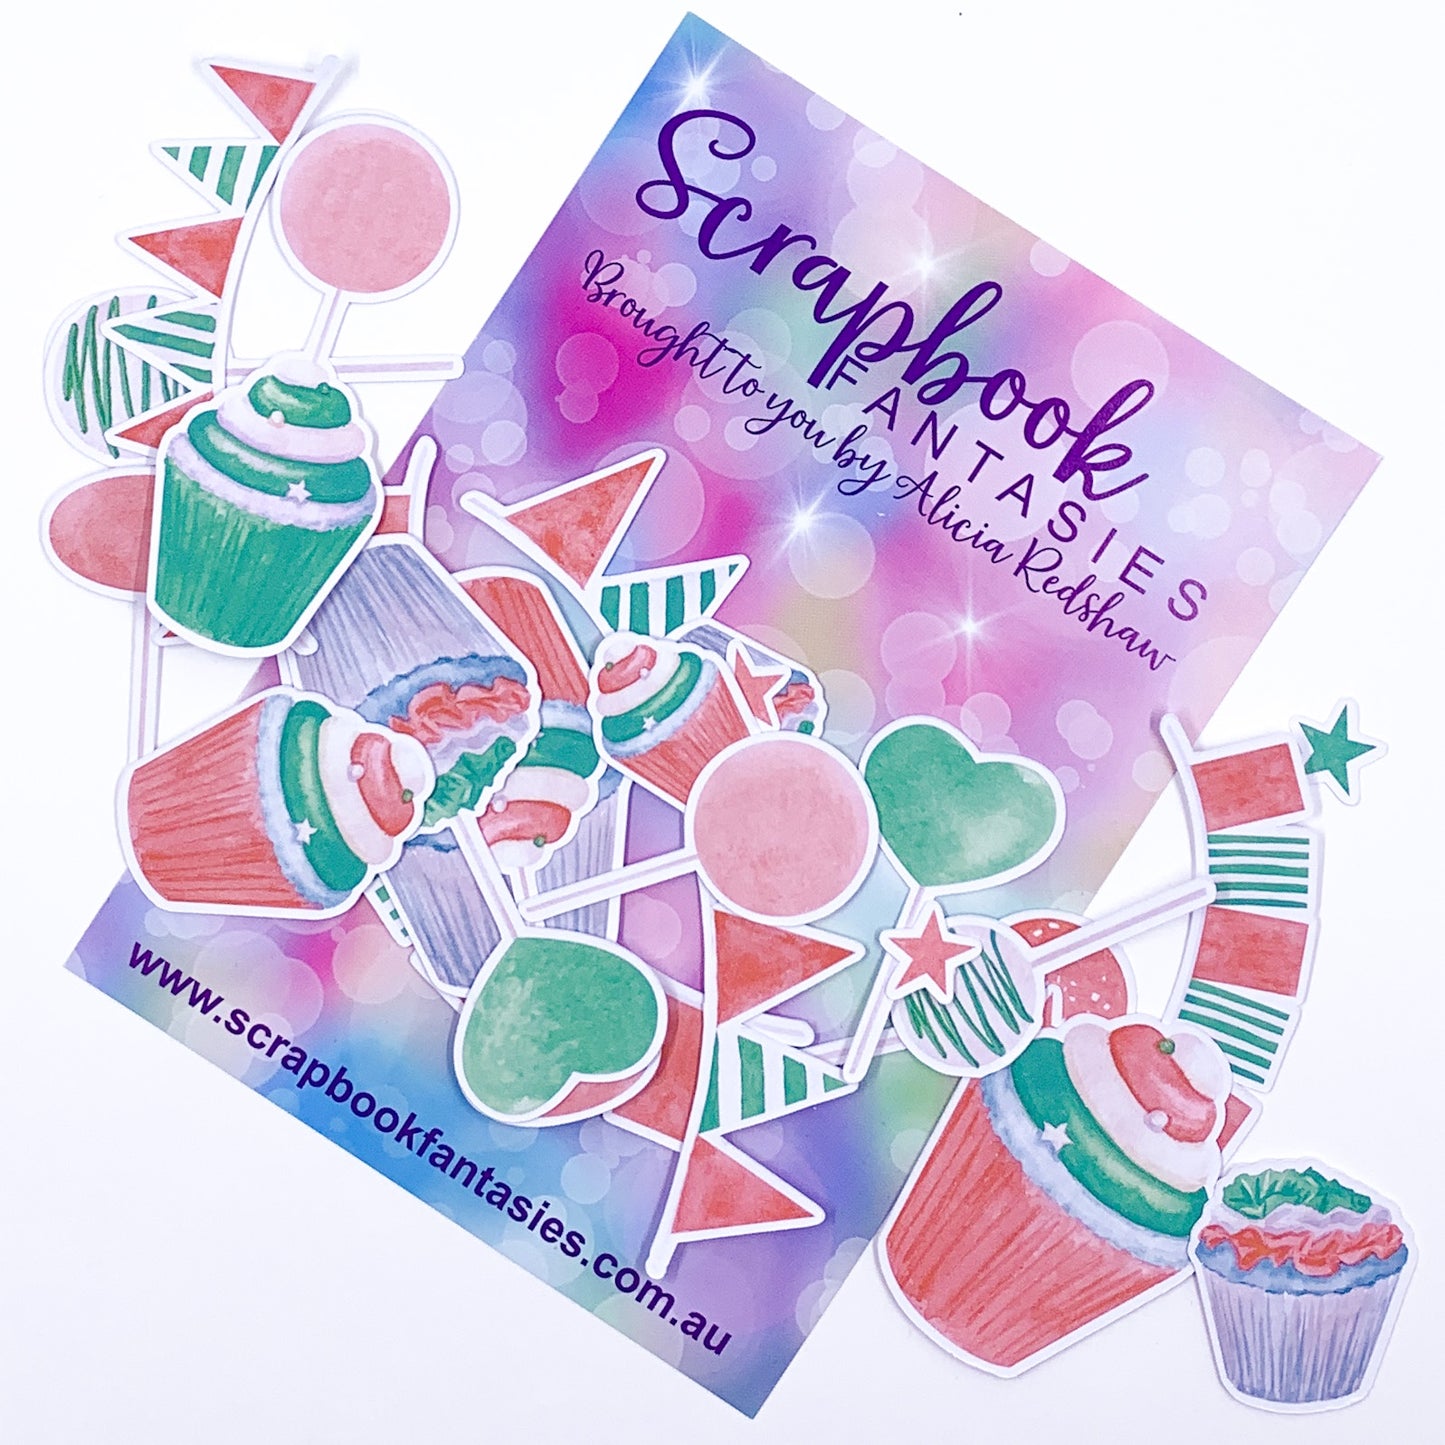 Colour-Cuts - Cupcakes & Banners 8 (26 pieces) Designed by Alicia Redshaw